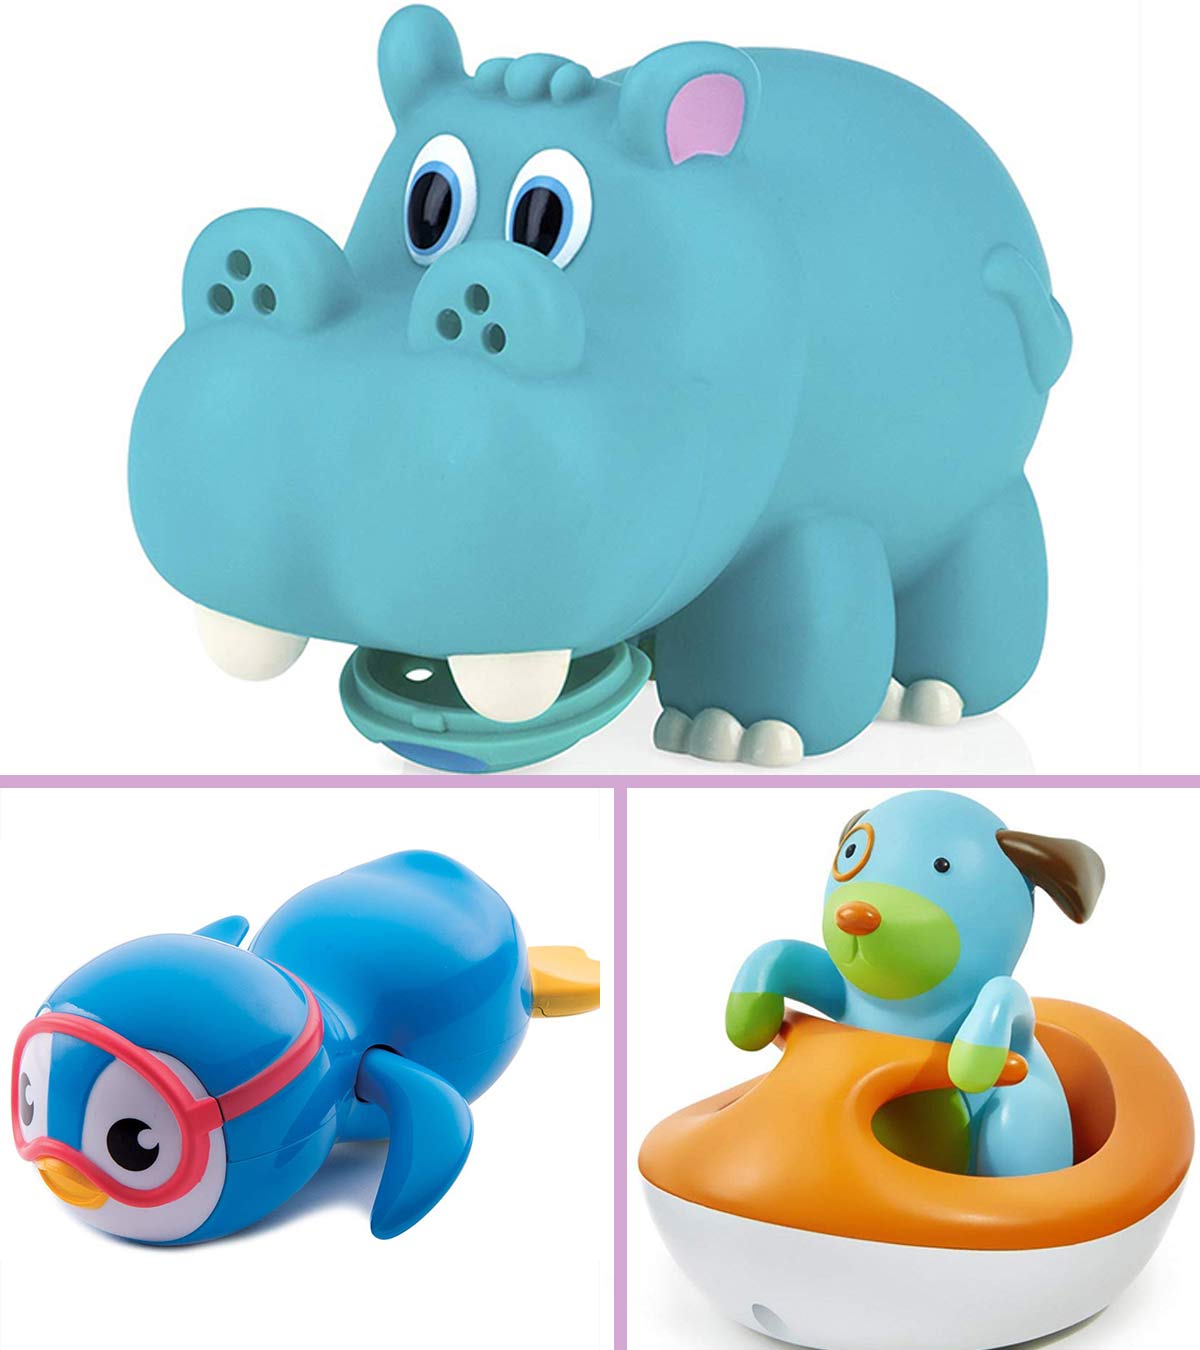 15 Best Bath Toys For Toddlers in 2023